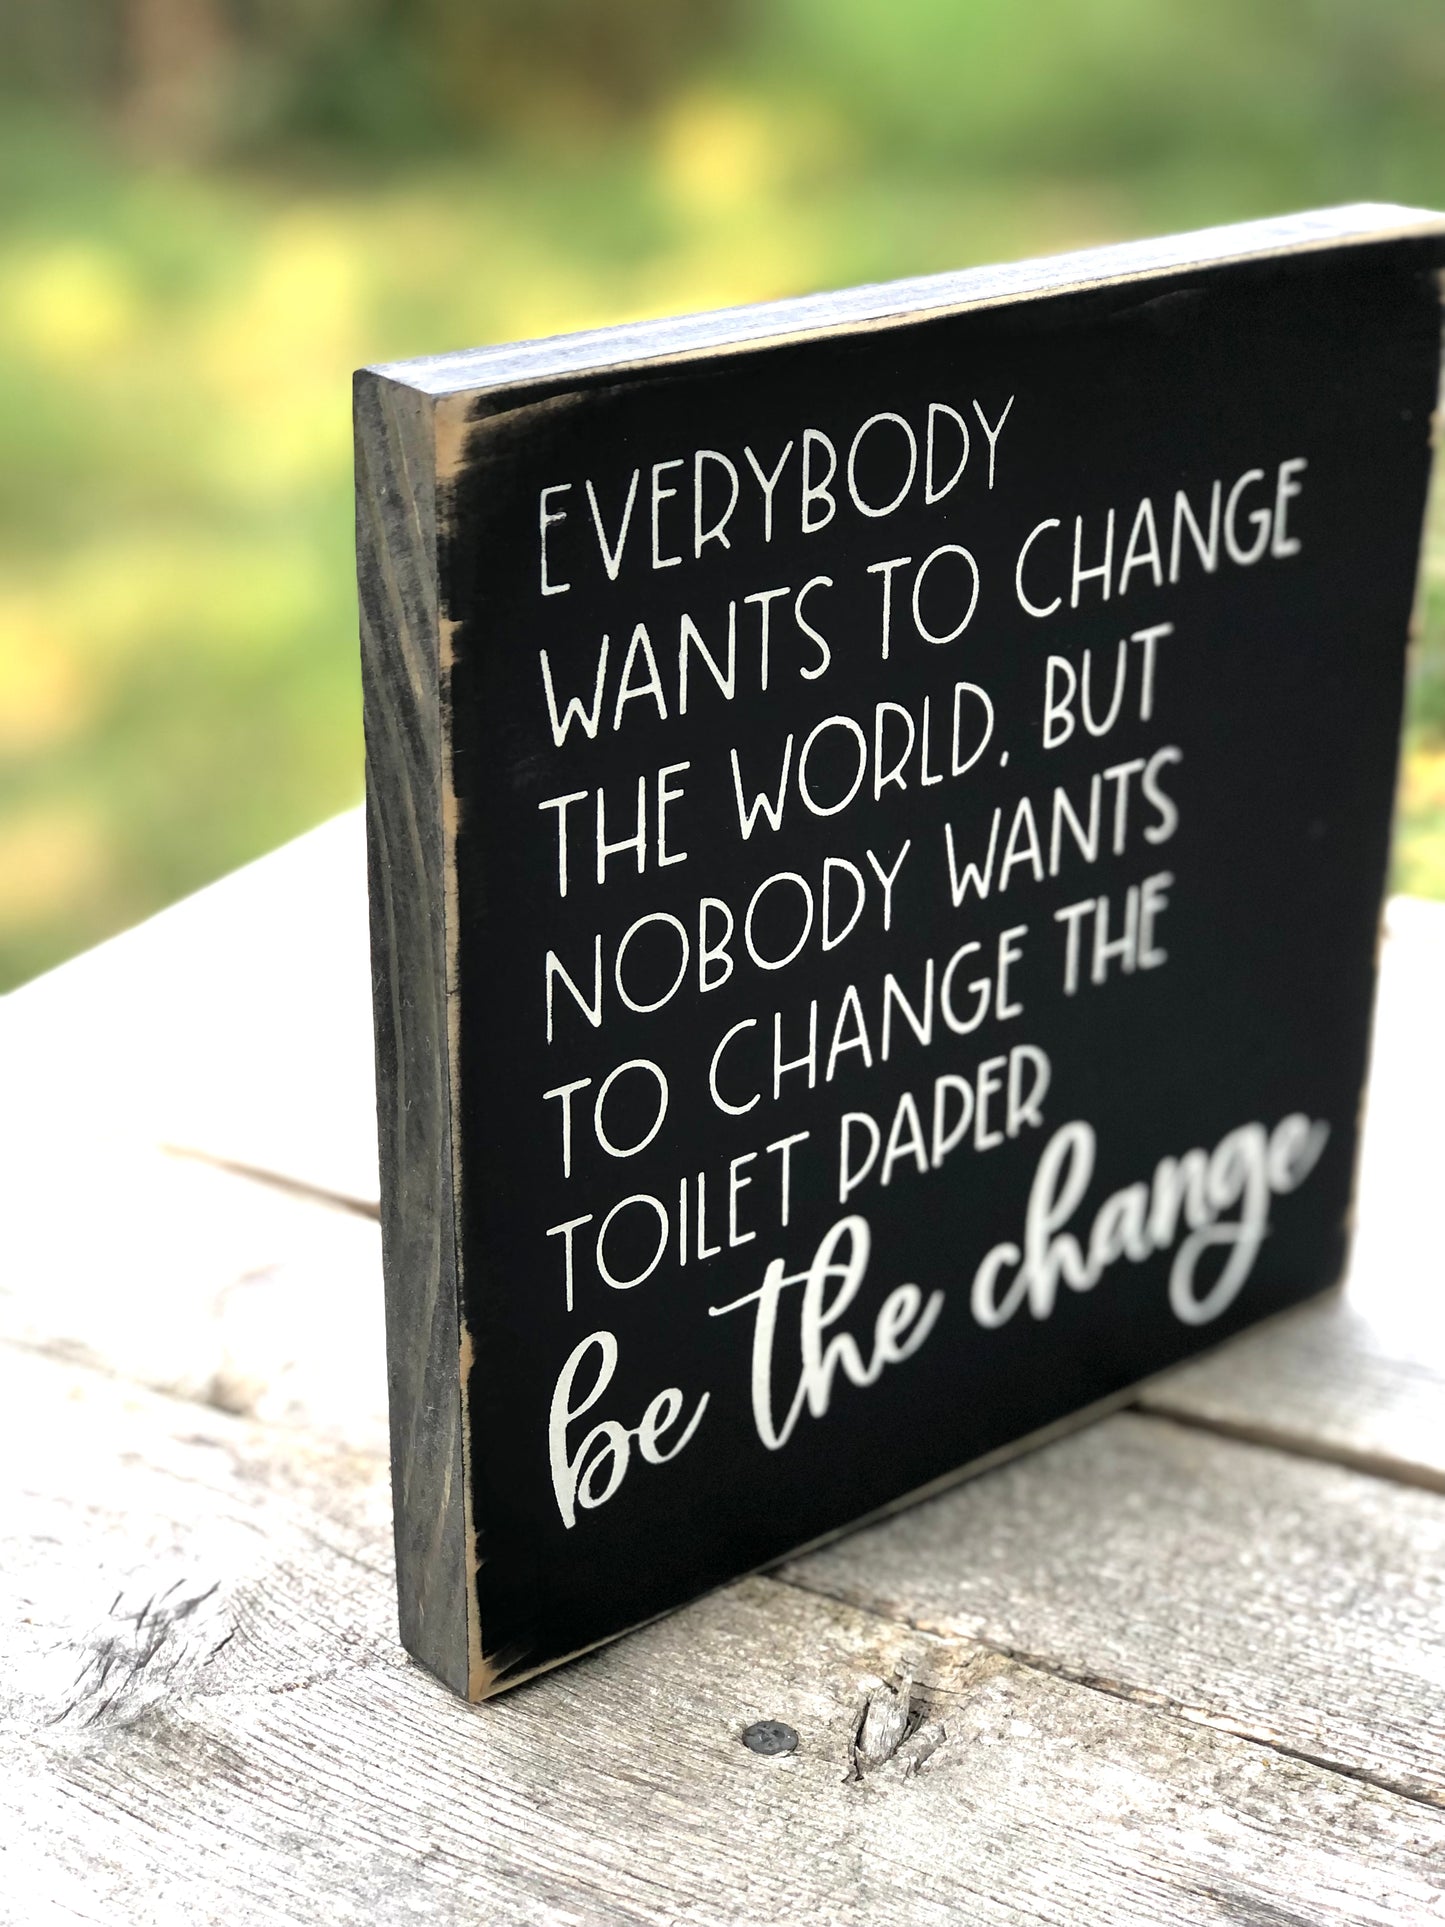 EVERYBODY WANTS TO CHANGE THE WORLD , BUT NO ONE WANTS TO CHANGE THE TOILET PAPER -BE THE CHANGE- WOOD SIGN